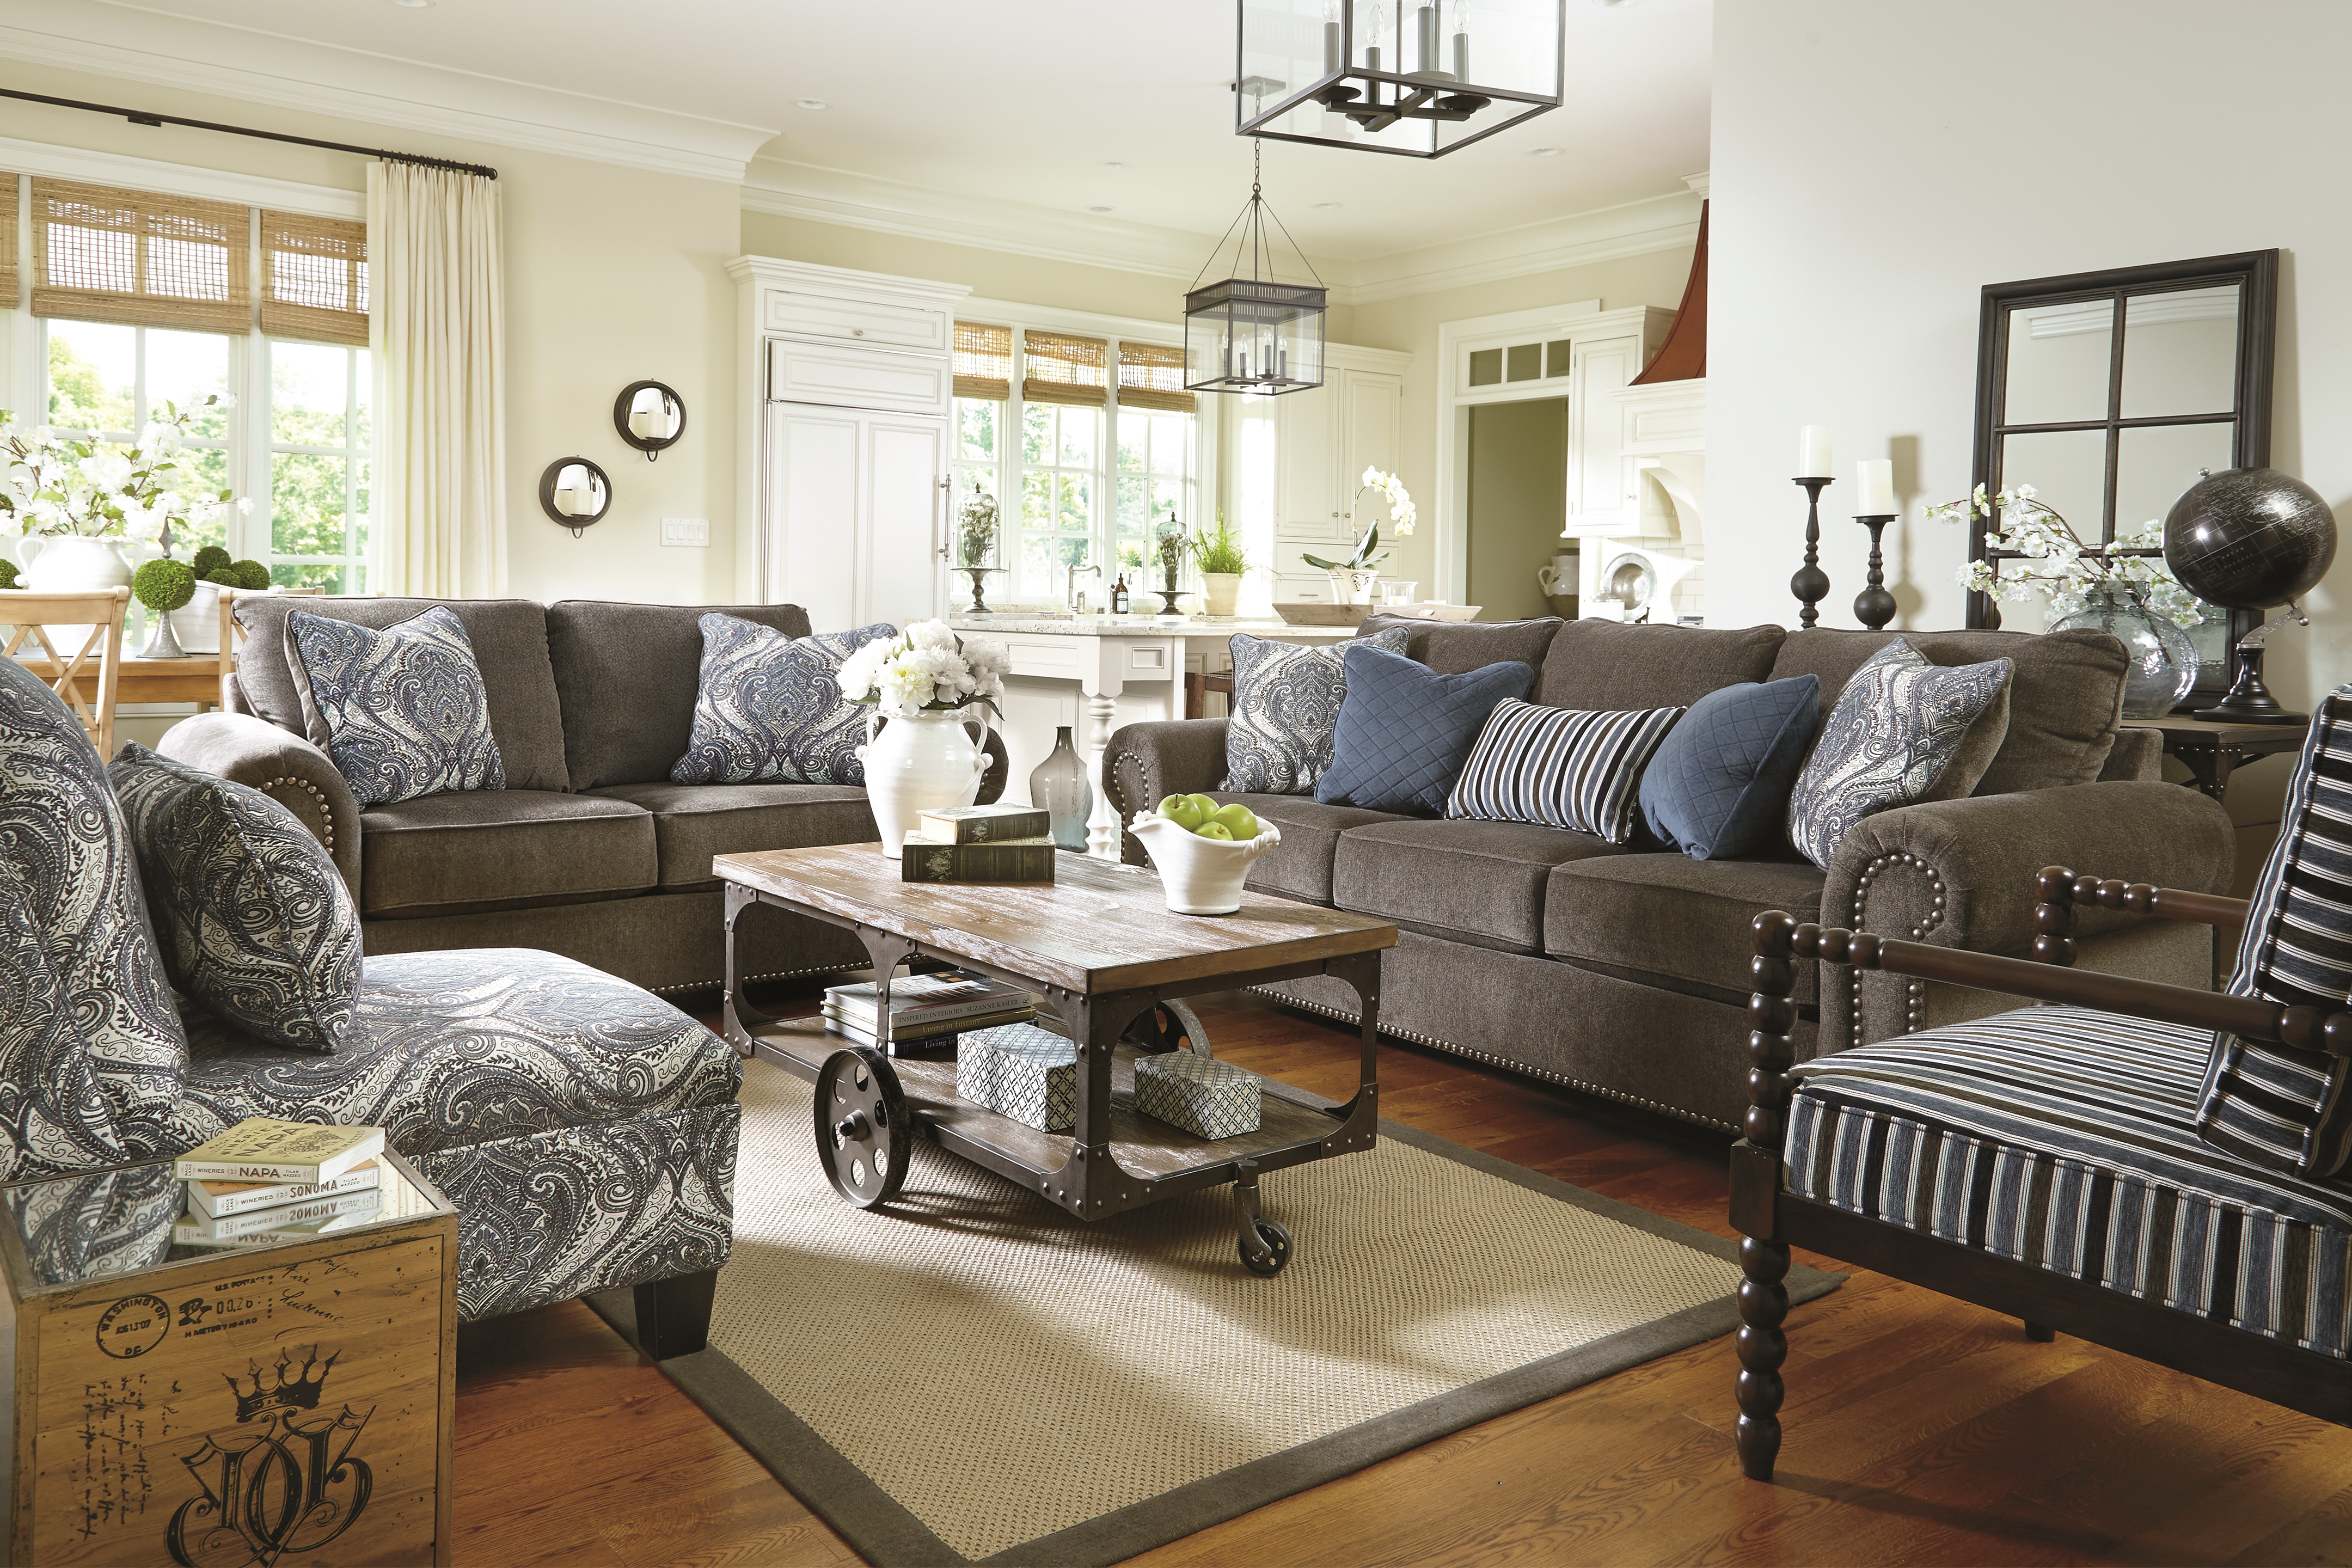 Living Room Furniture Layout Guide & Plan Ideas   Ashley Furniture ...